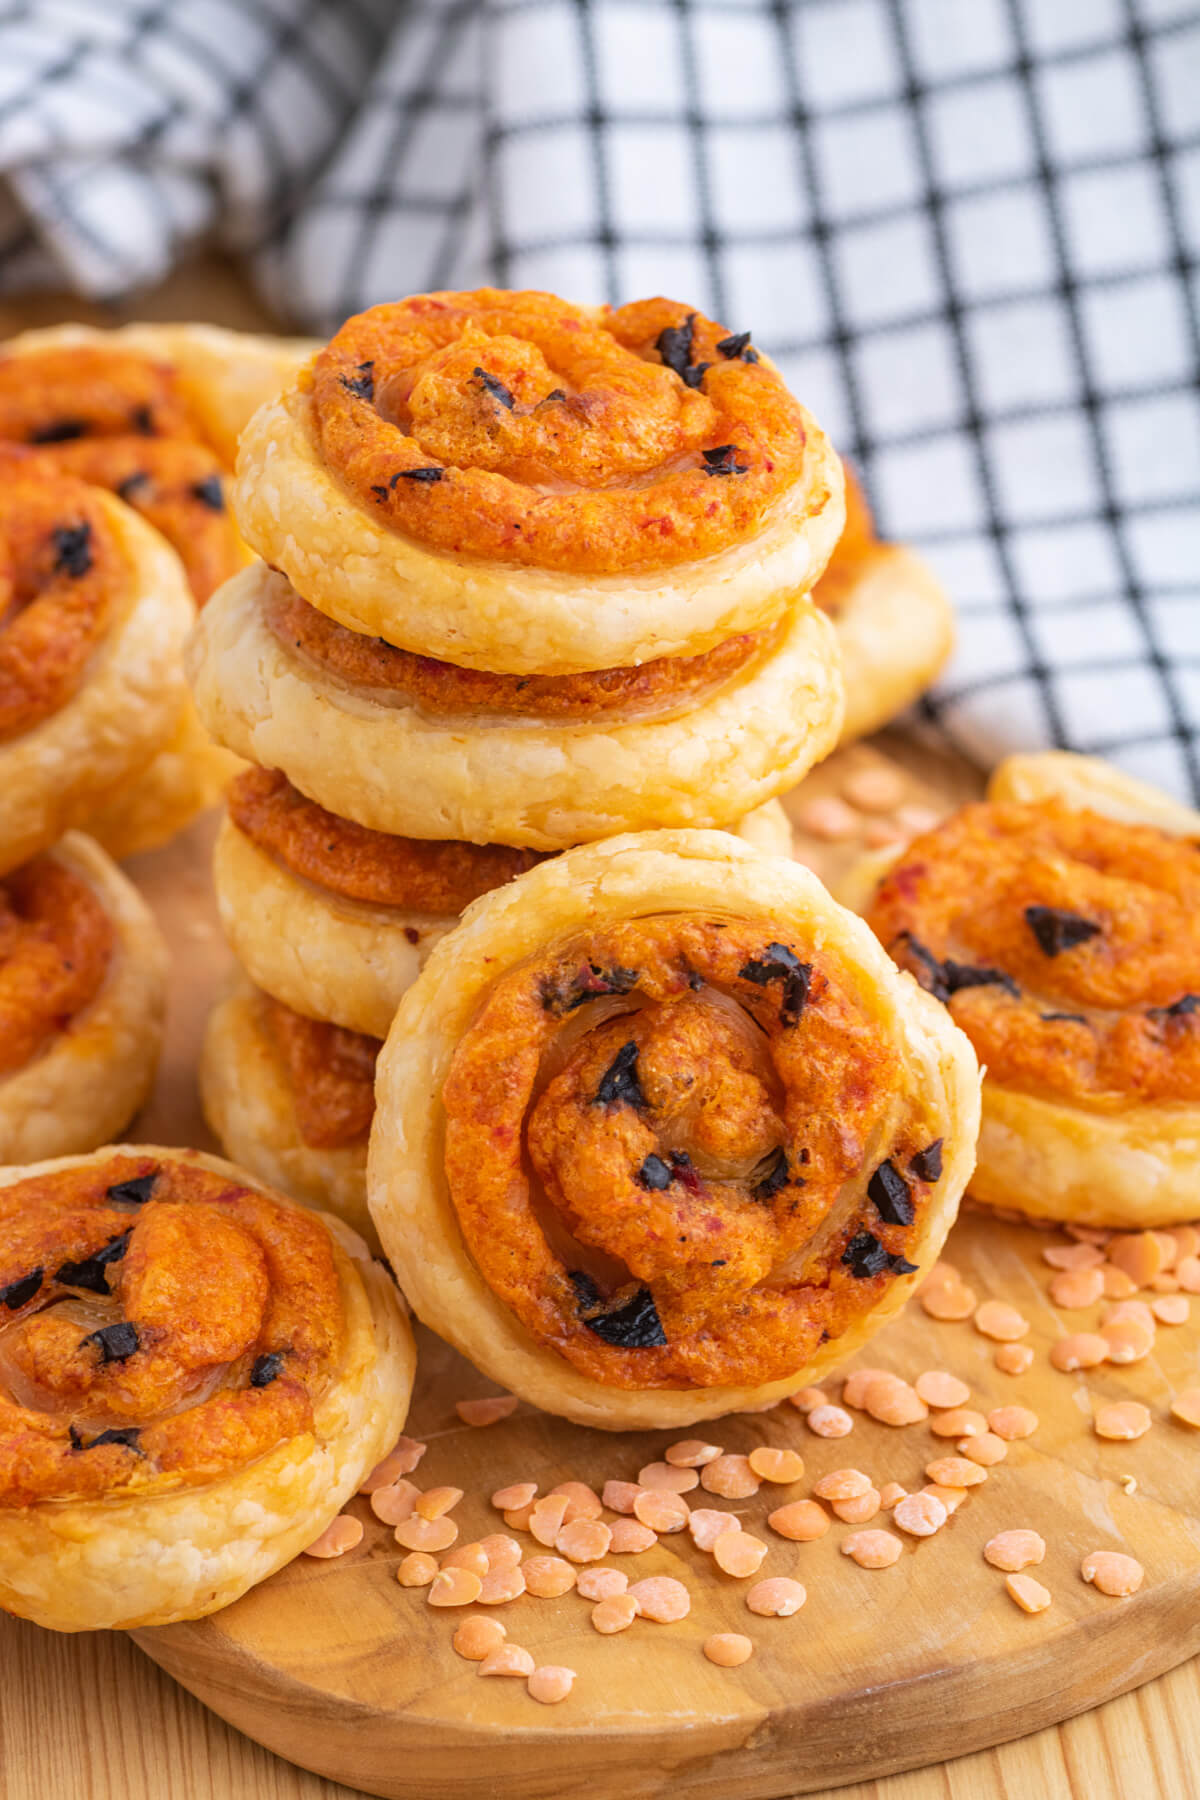 A stack of golden baked puff pastry pinwheels on a wooden board garnished with red lentils.